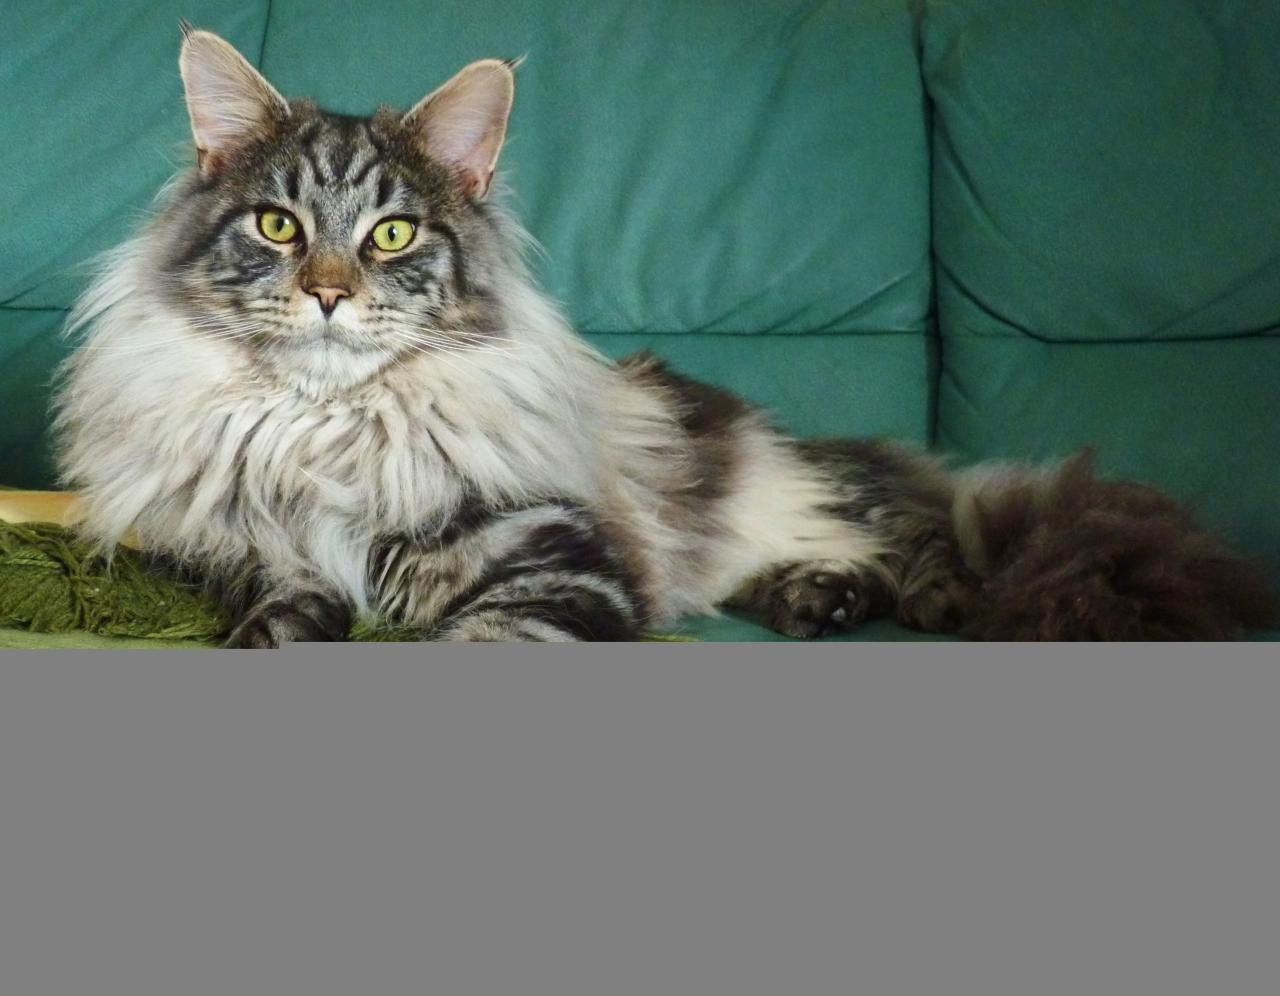 Coon maine cat sijka blue robert mainecoon cats colors common coons majestic felis breed tabby most solid ticked photographer beauty